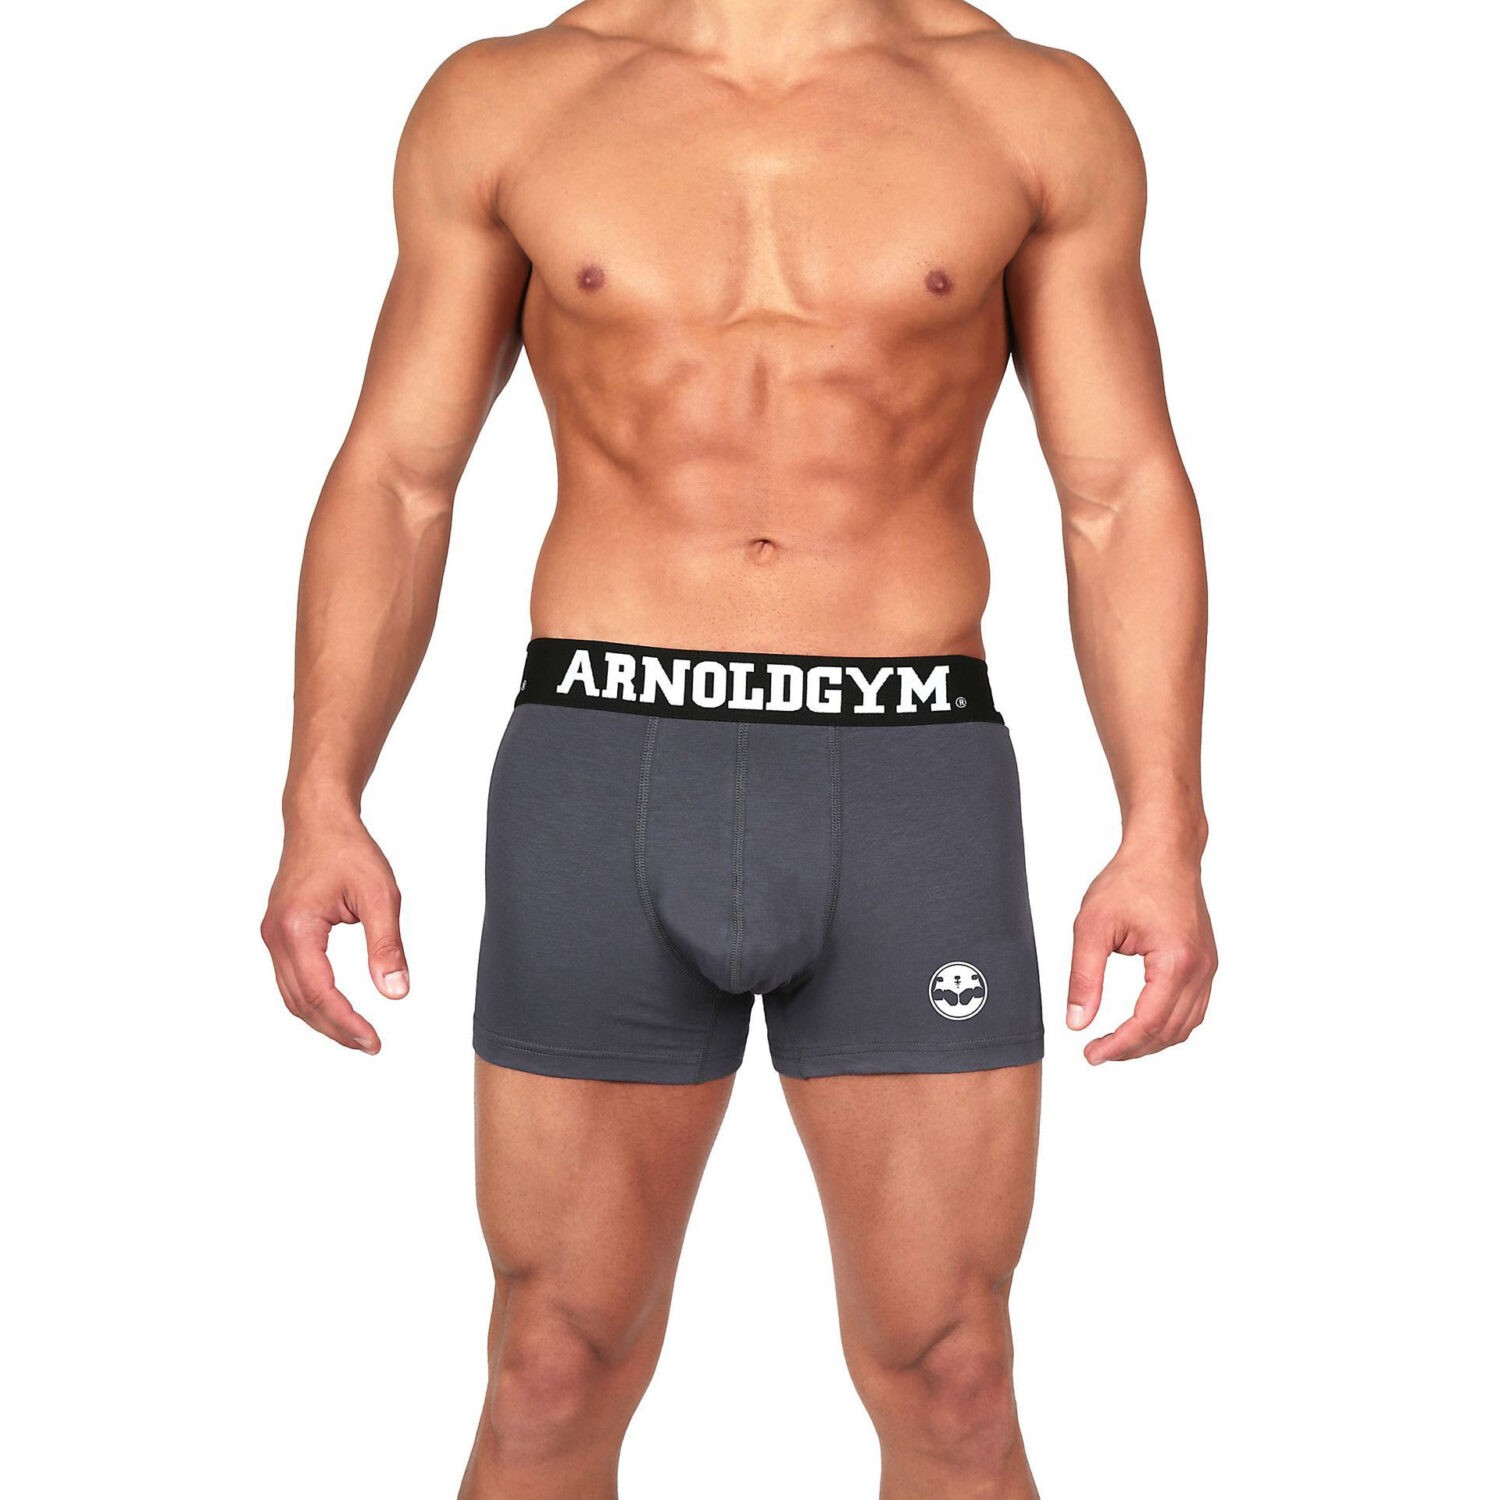 https://www.arnoldgymgear.com/wp-content/uploads/2020/09/0000443_arnold-gym-sport-series-anthracite-grey-trunks-2-pack.jpeg